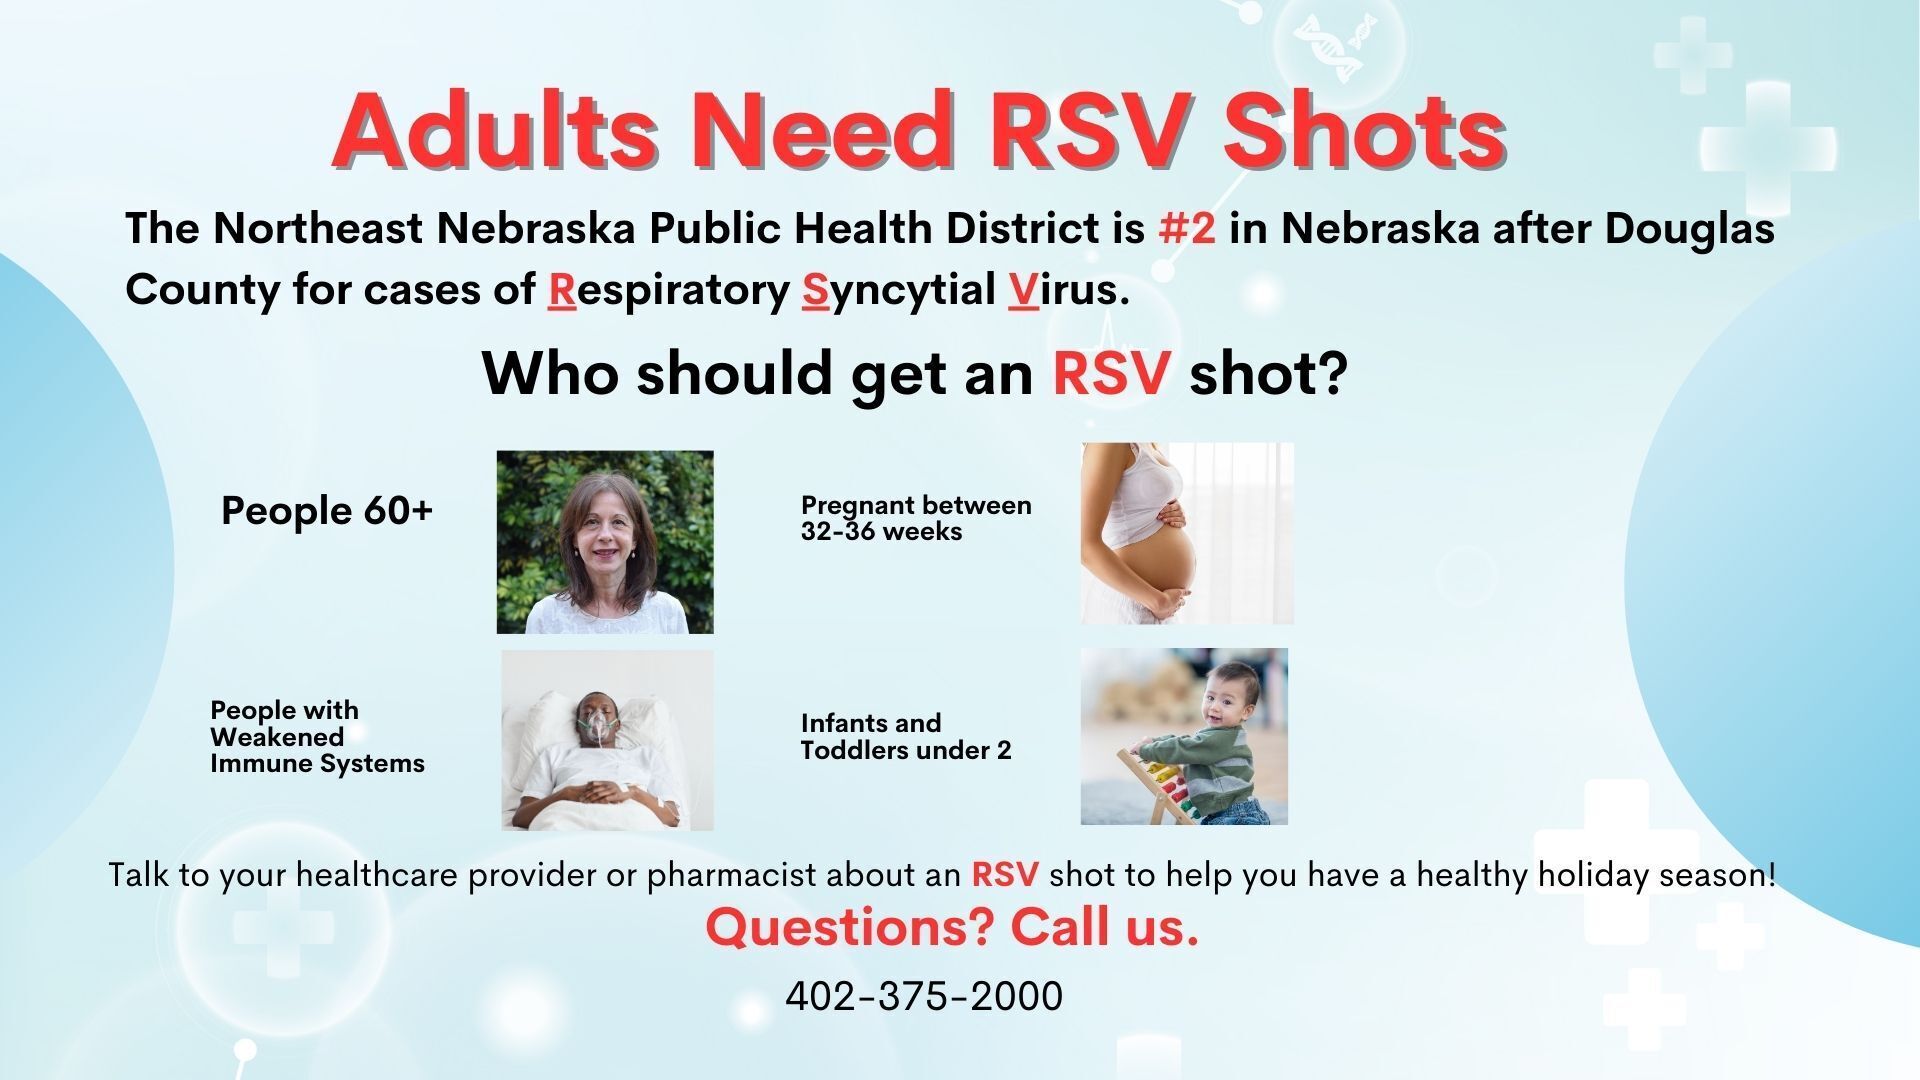 Click here for more information on RSV